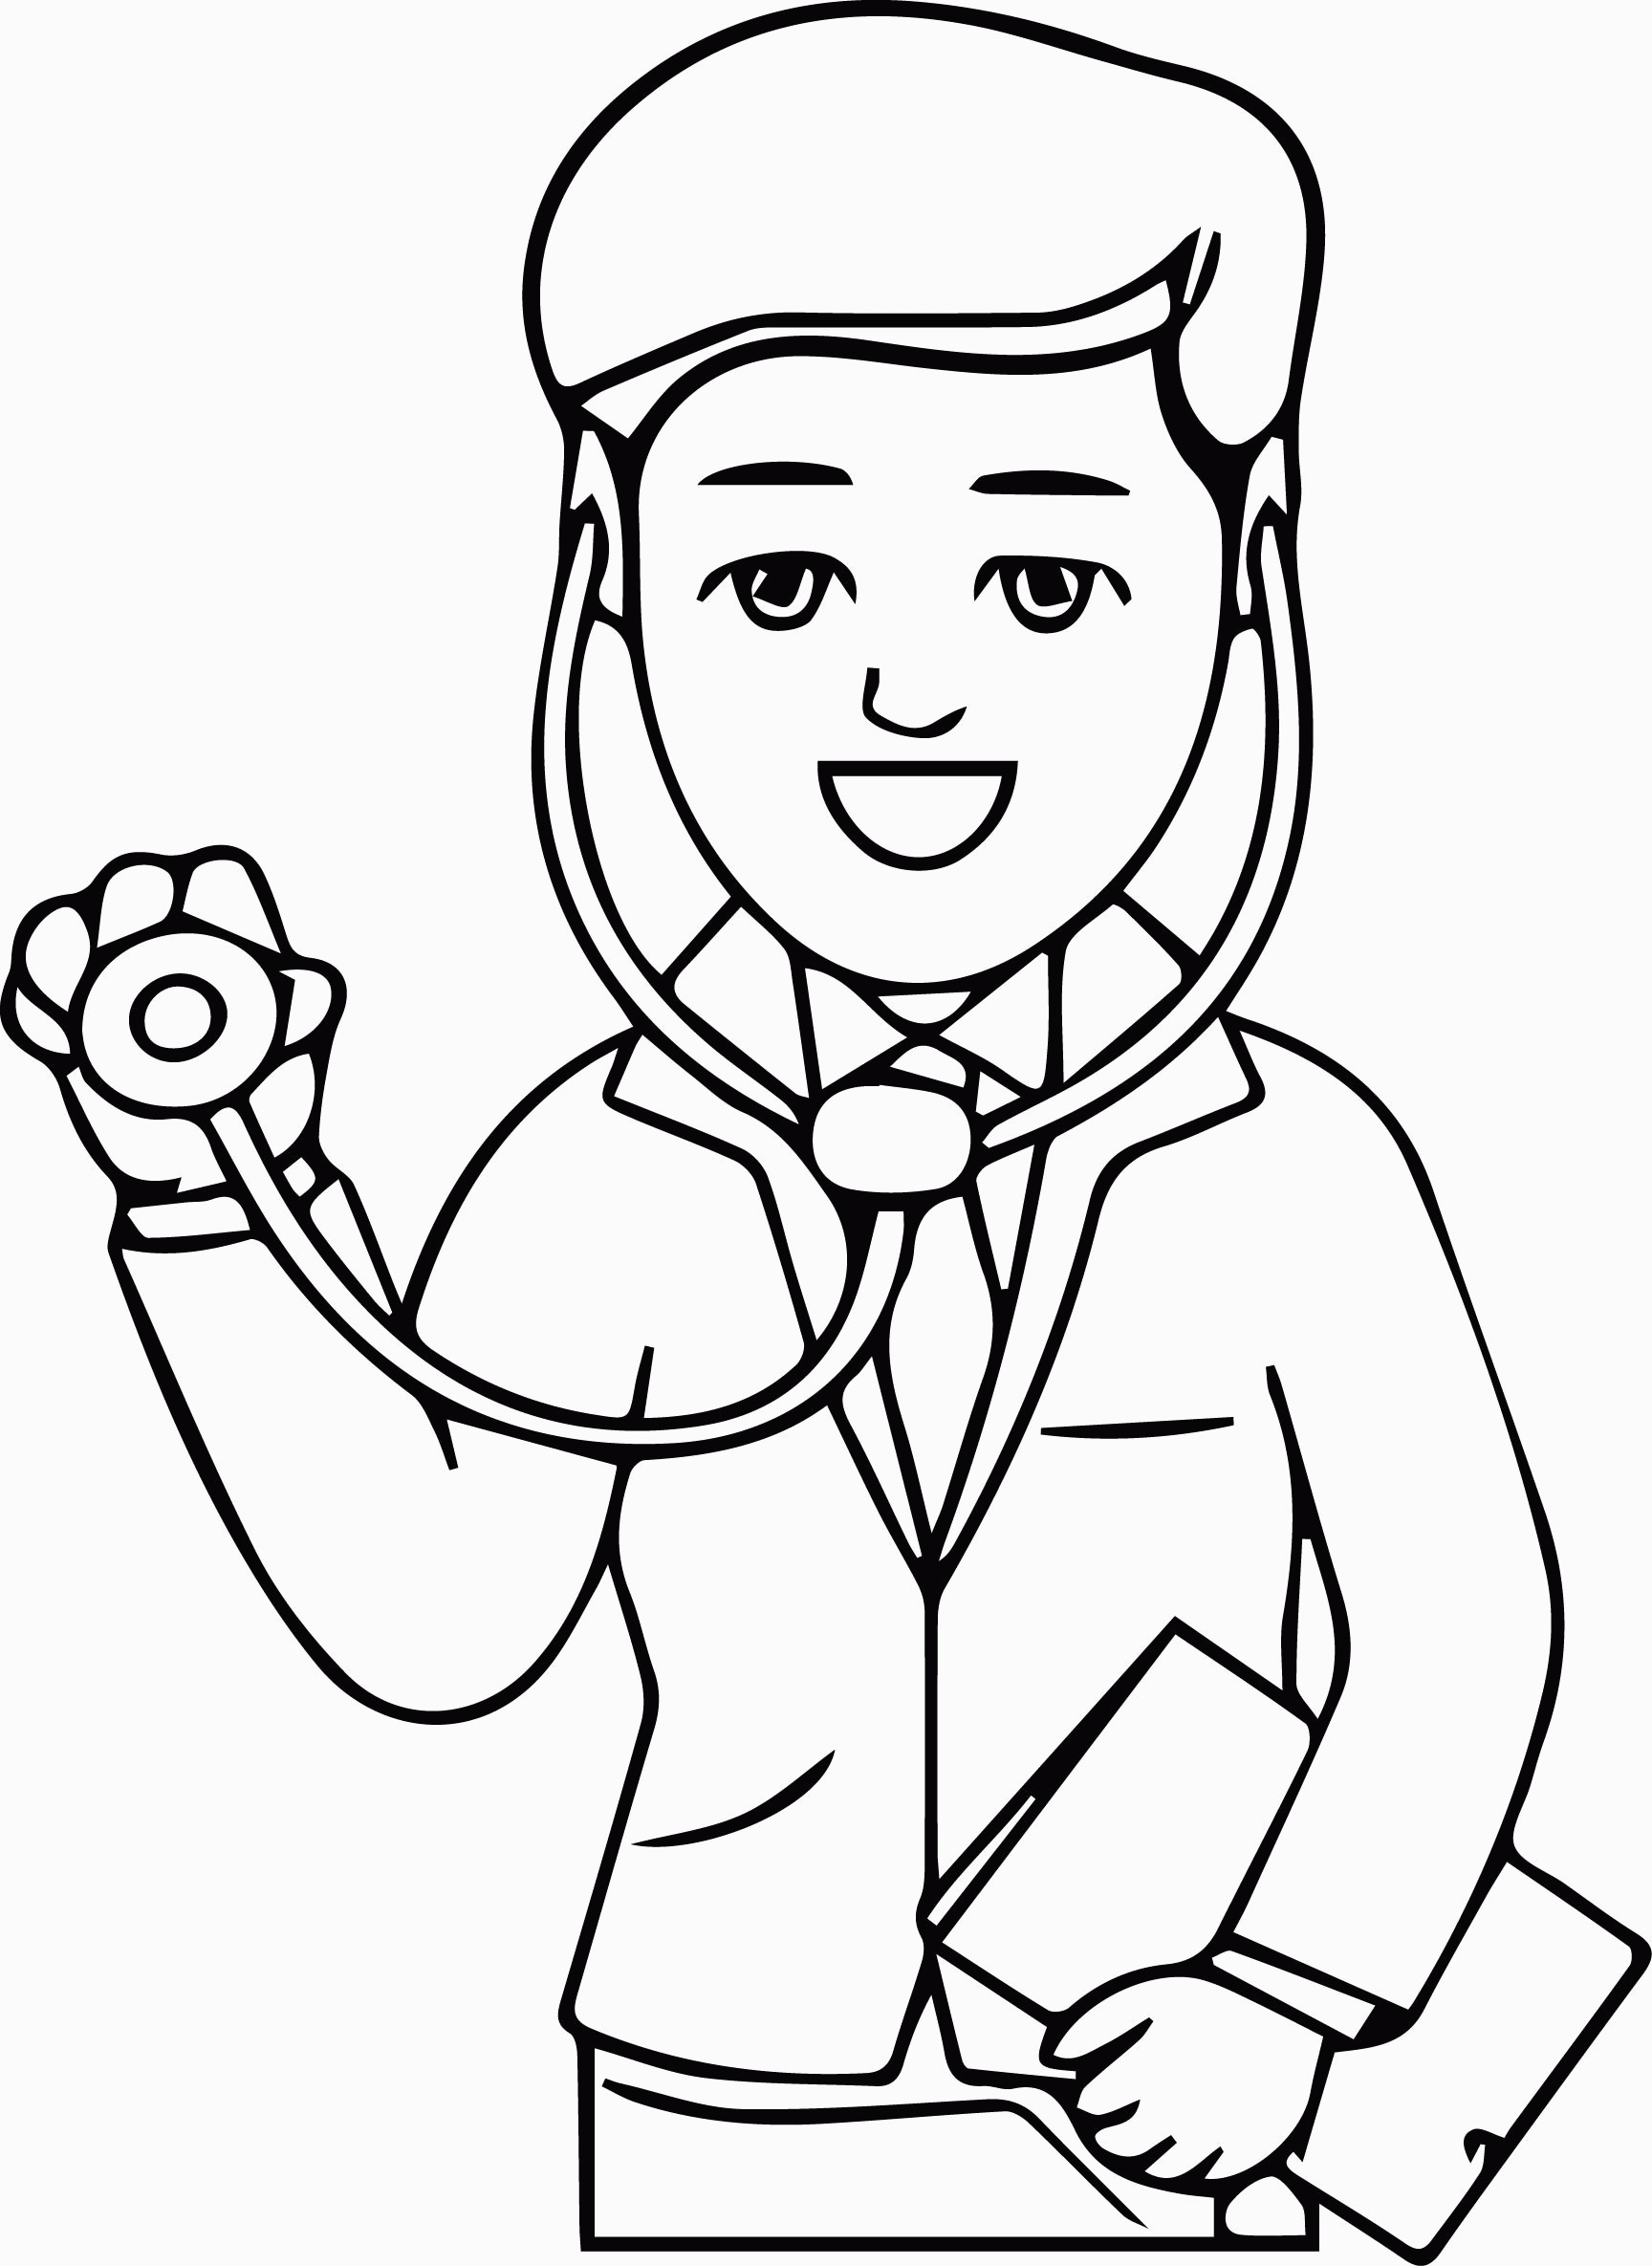 Pro Doctor Coloring Page